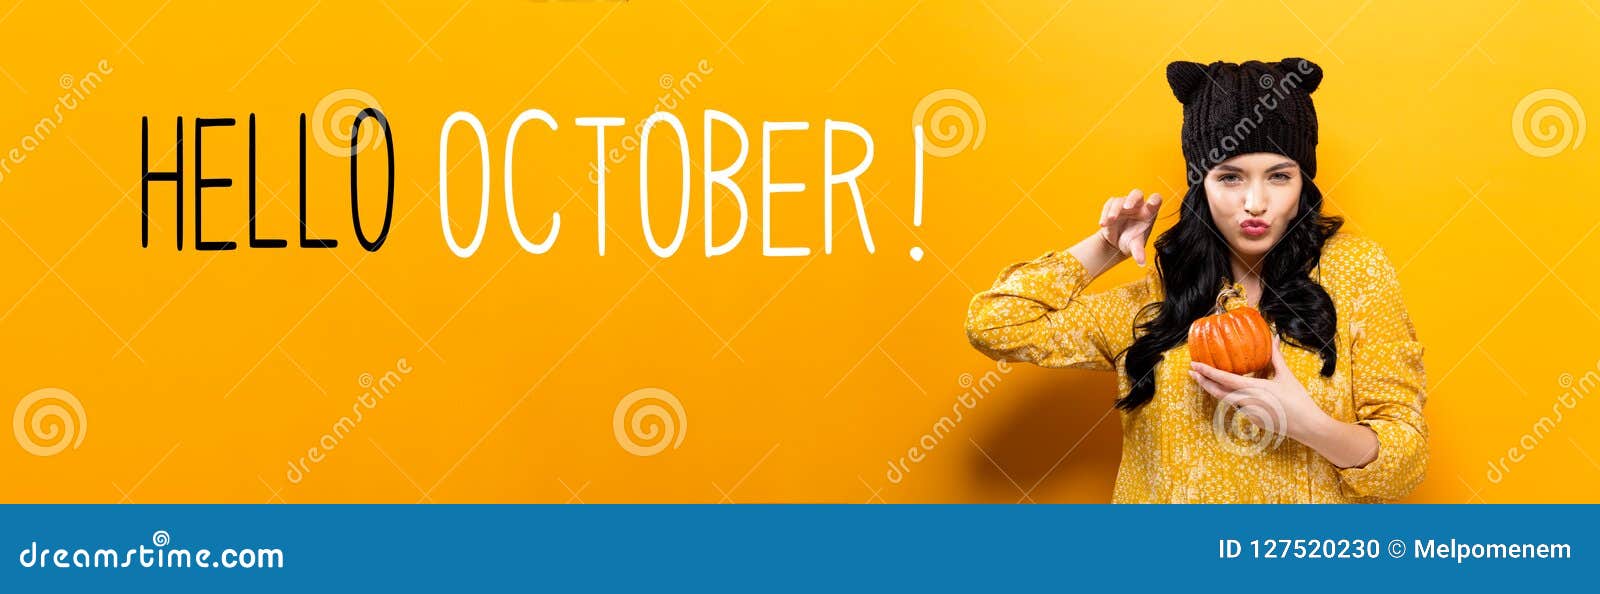 hello october with woman holding a pumpkin